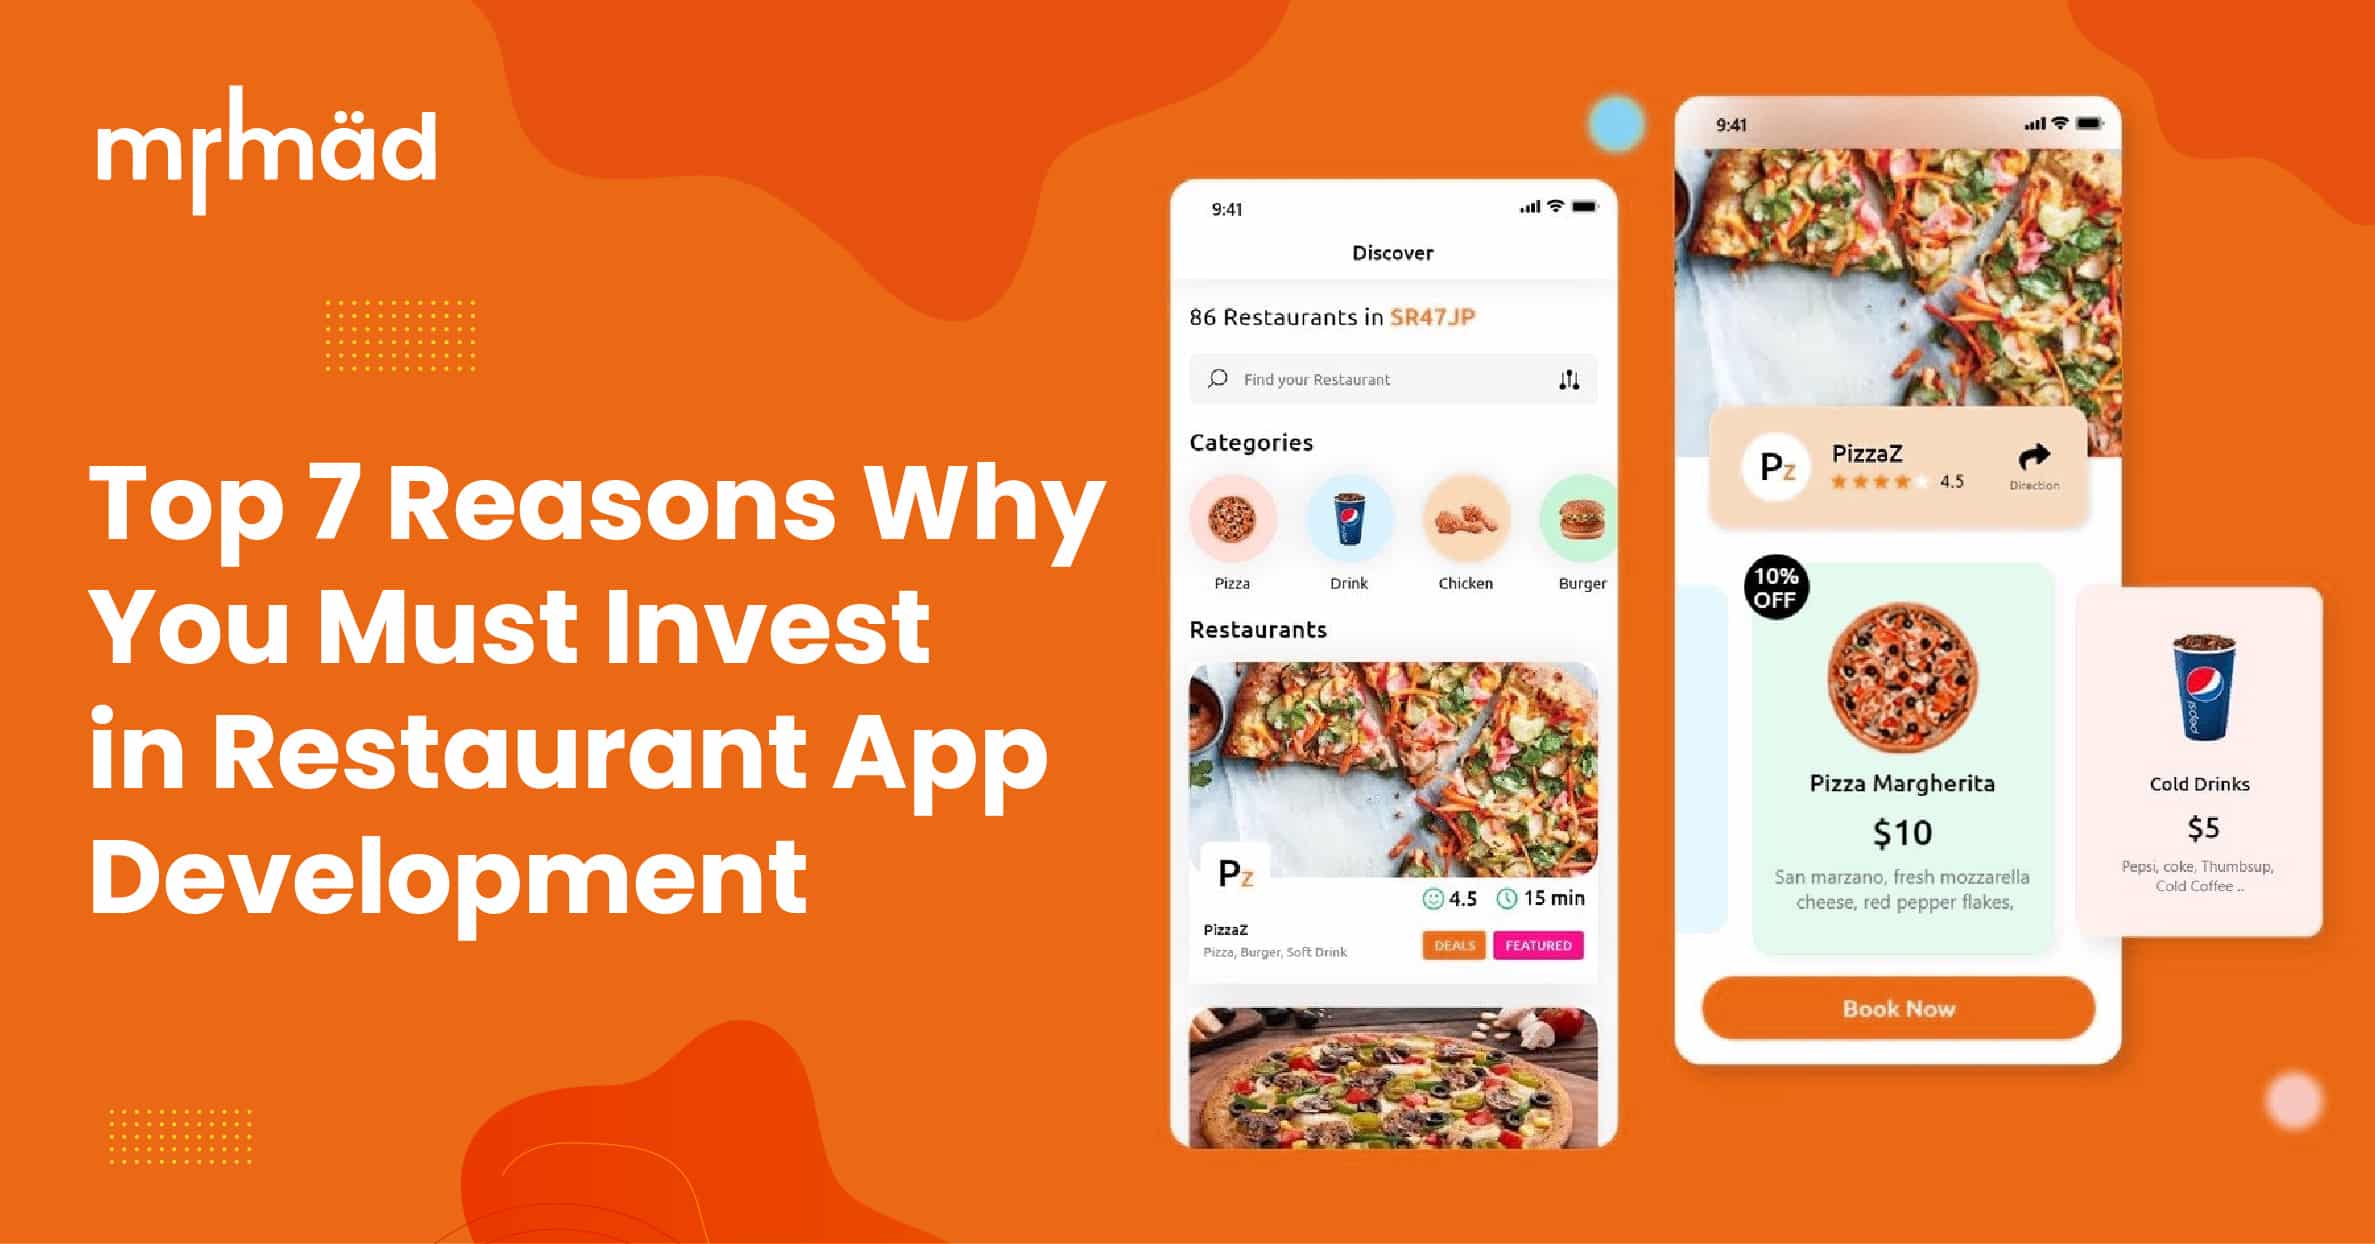 Top 7 Reasons Why You Must Invest in Restaurant App Development